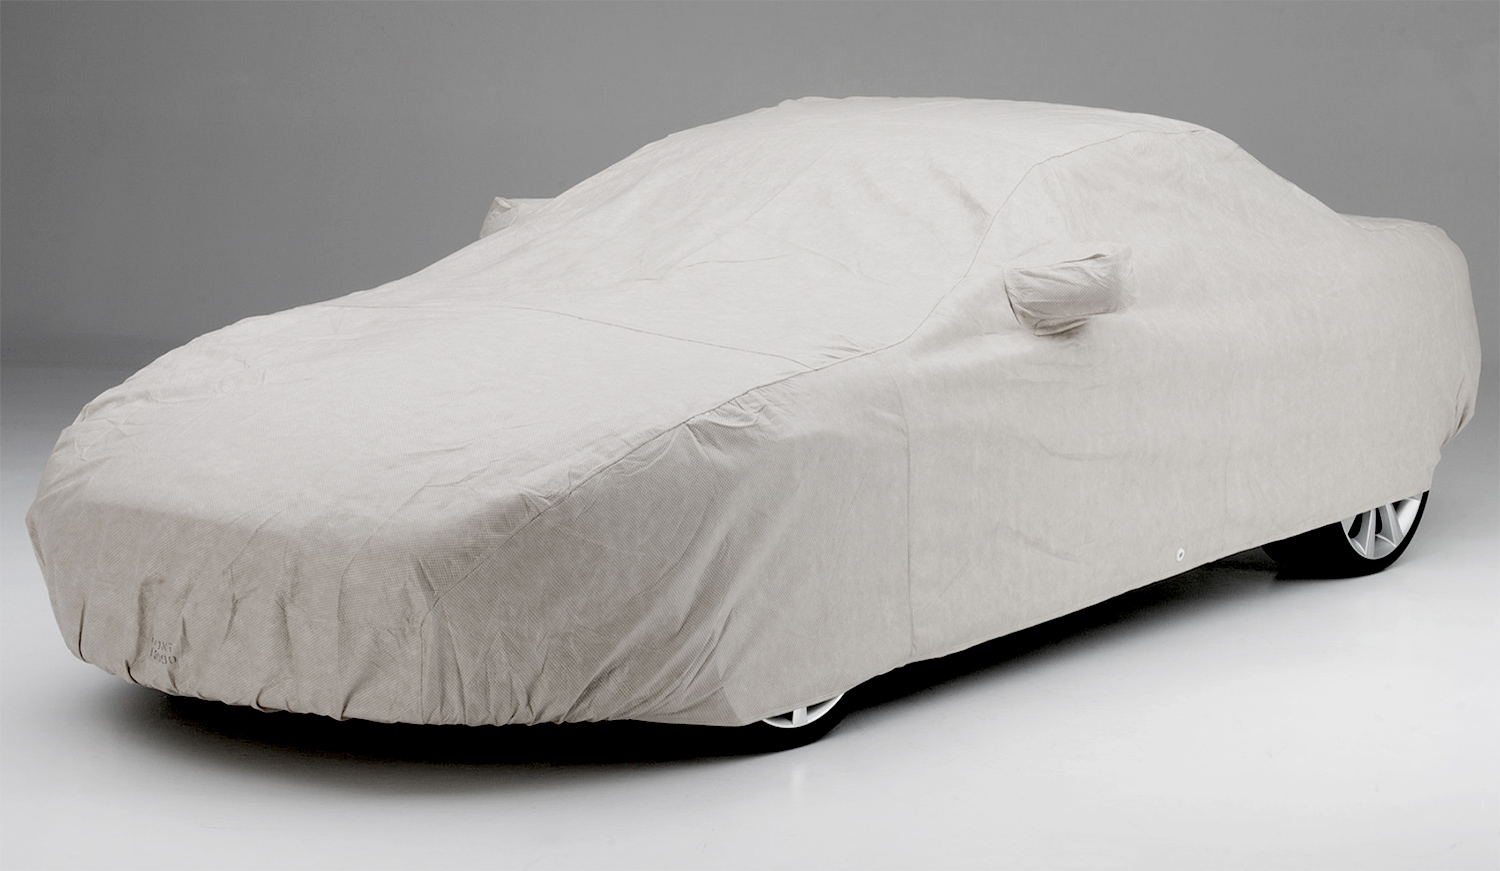 Block It Dustop Car Cover Italy, SAVE 43%